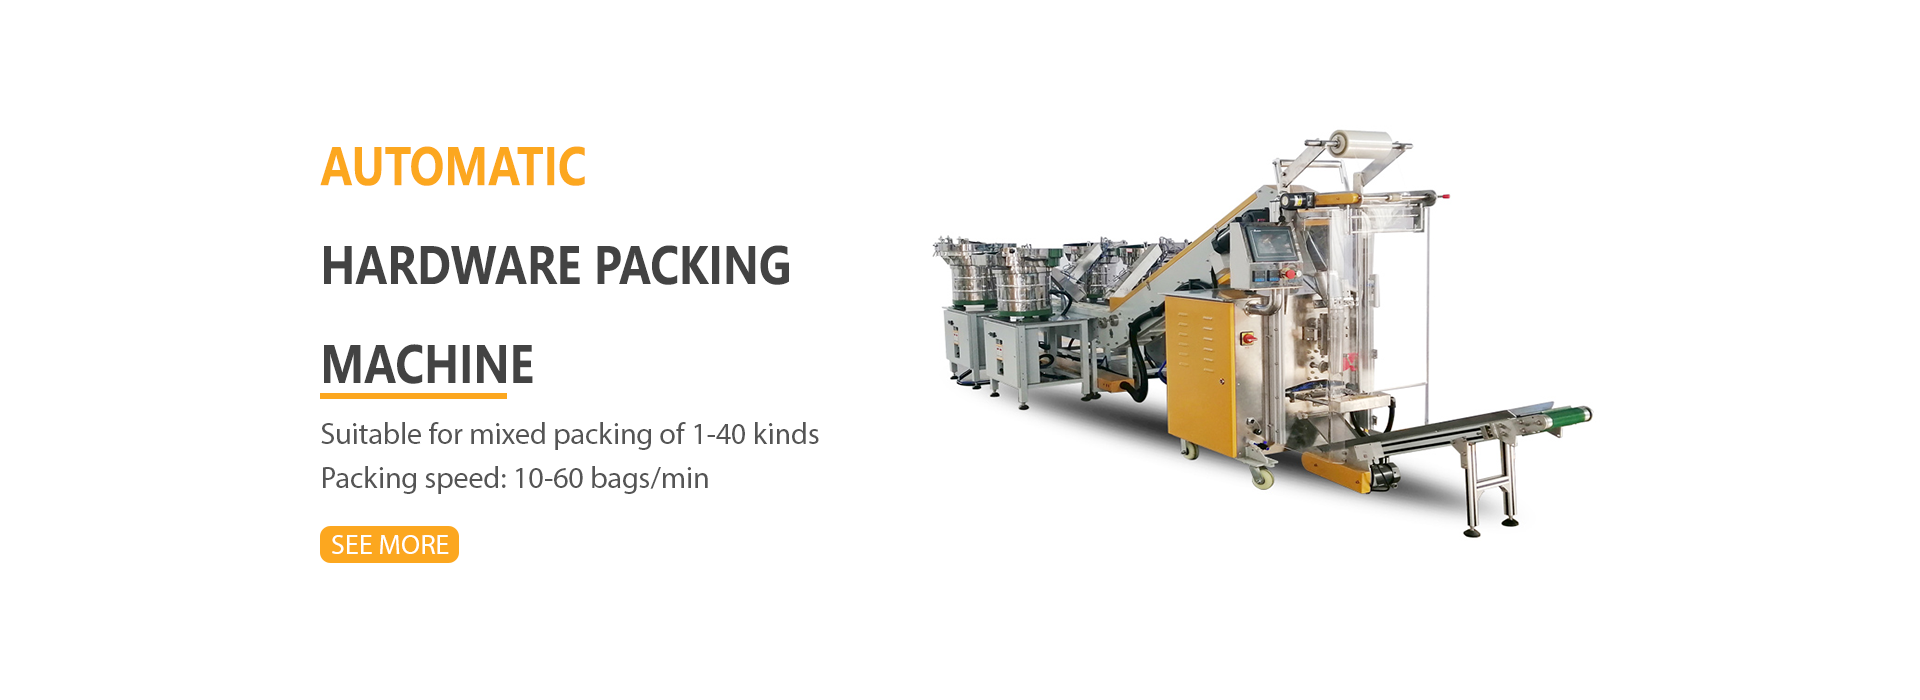 Automatic hardware packaging machine